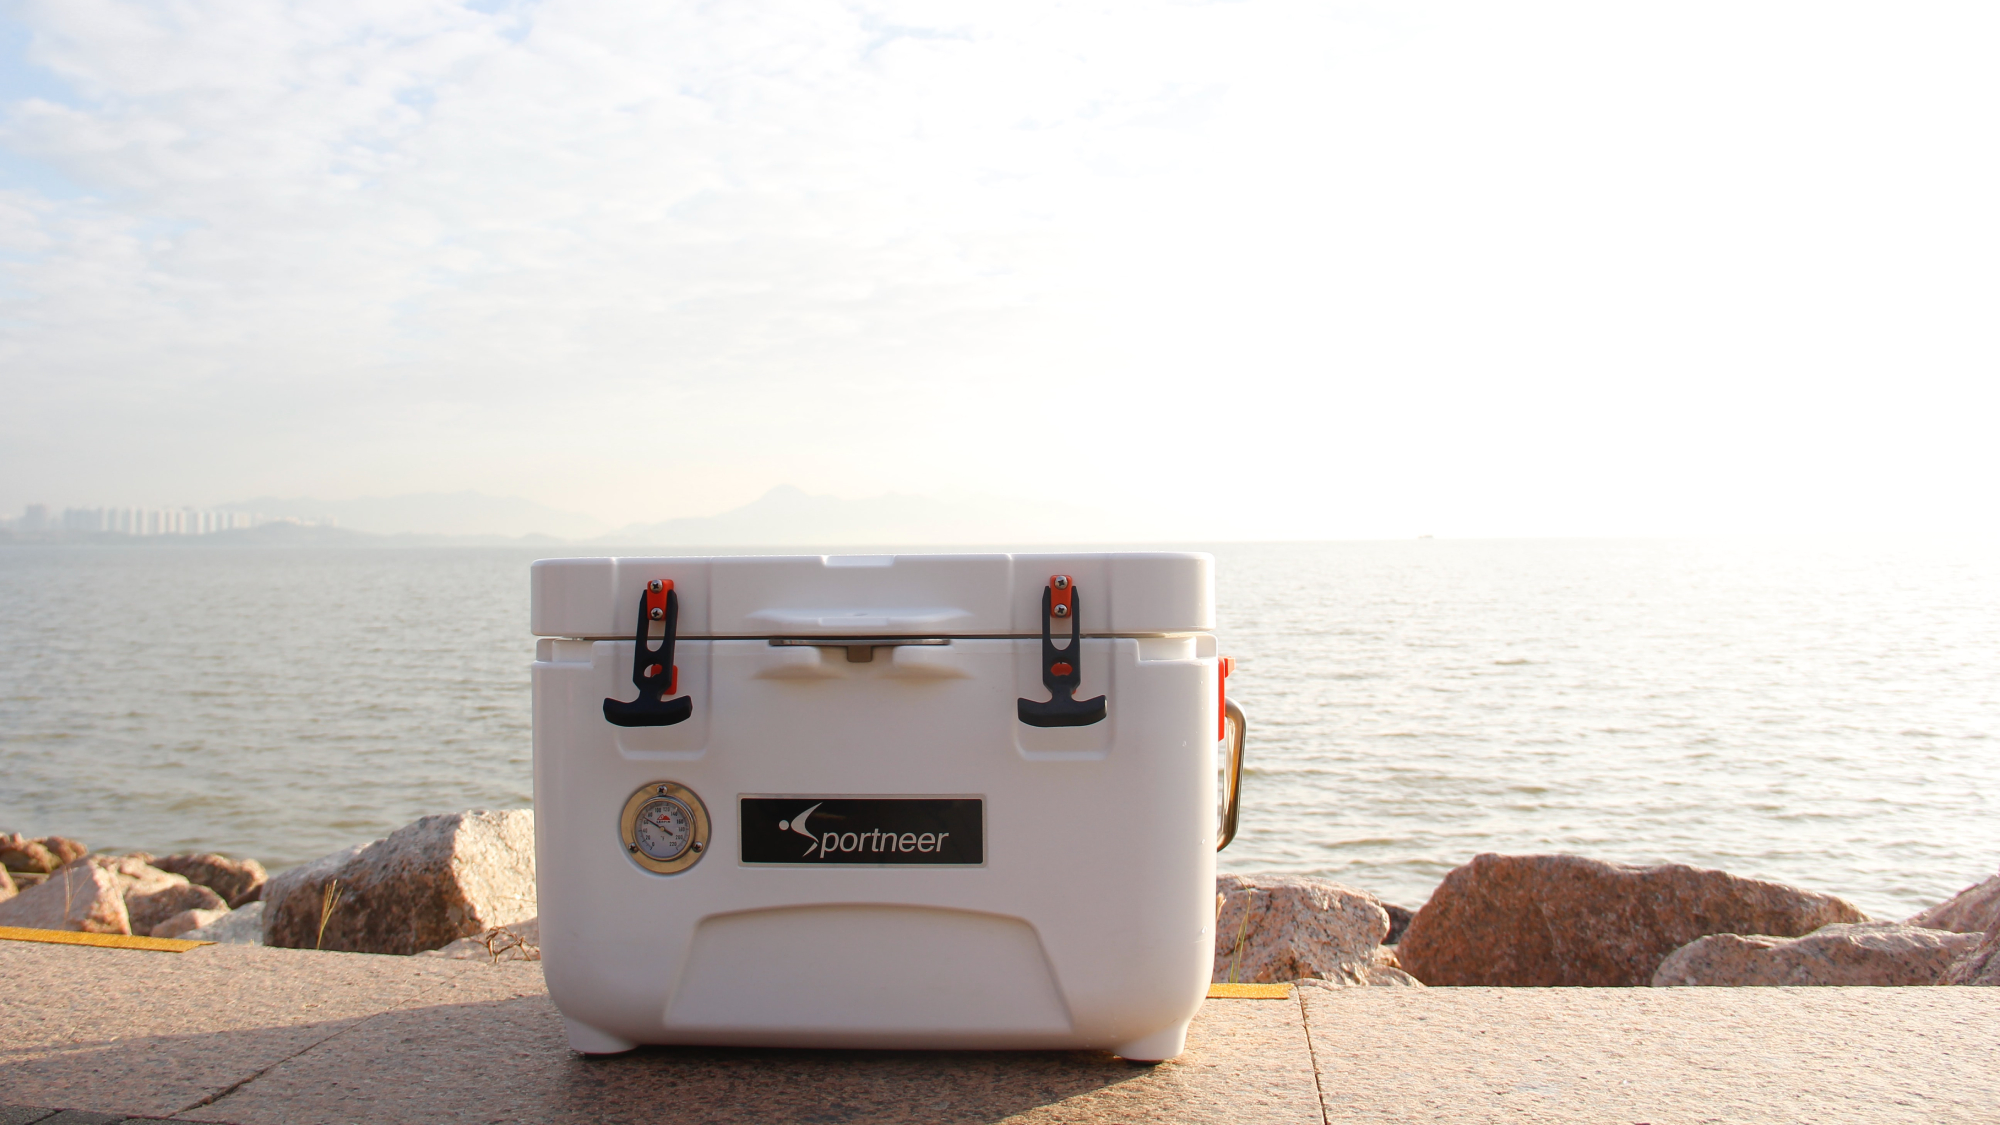 A white cooler sitting in the sun on a concrete sidewalk by a large body of water.